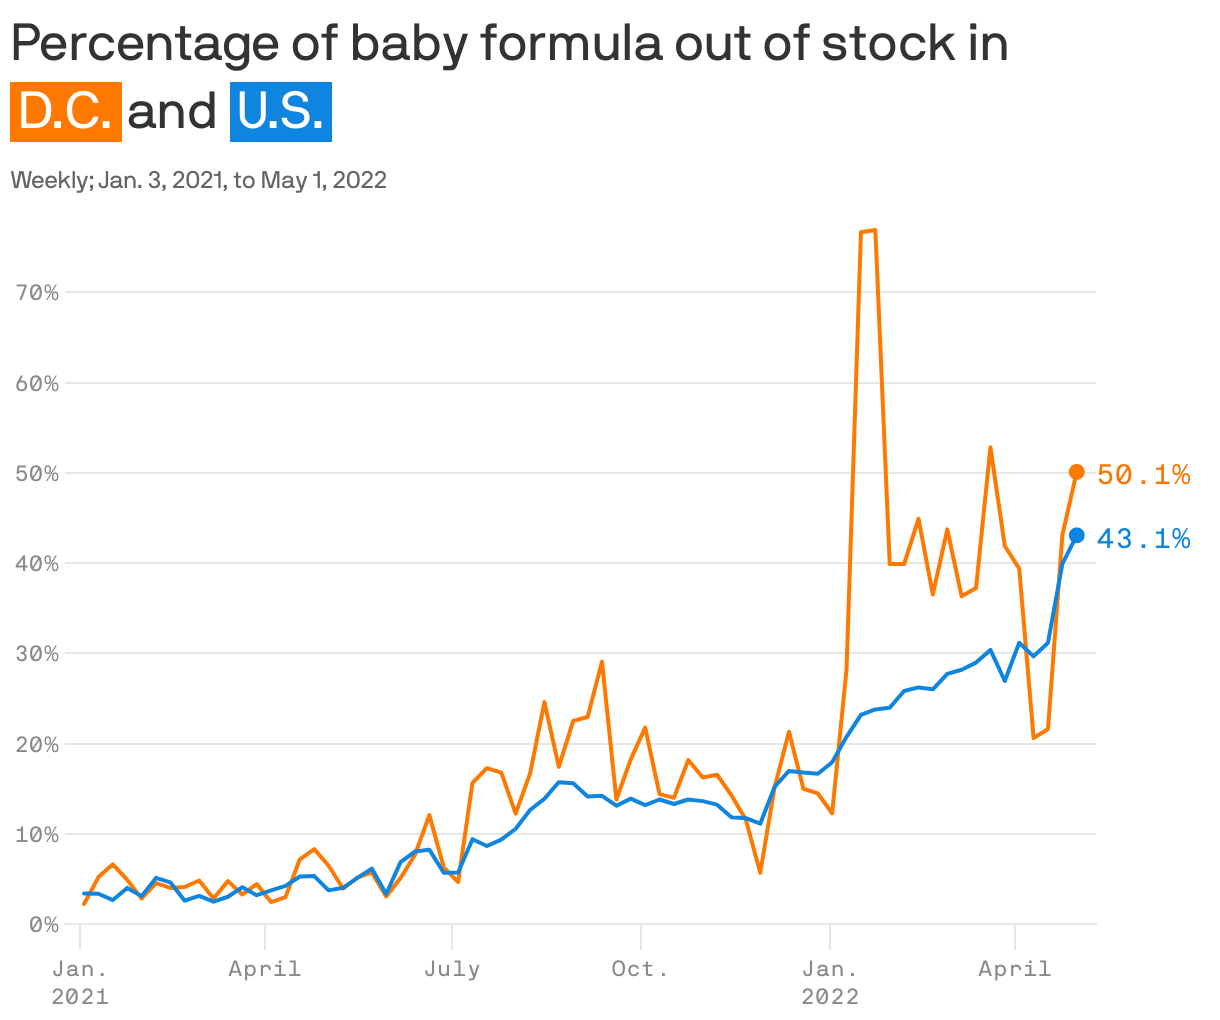 Percentage of baby formula out of stock in <span style="color: white; background-color:#ff7900; padding: 2px 4px; margin-right:3px; white-space: nowrap;">D.C.</span>and <span style="color: white; background-color:#1085df; padding: 2px 4px; margin-right:3px; white-space: nowrap;">U.S.</span>